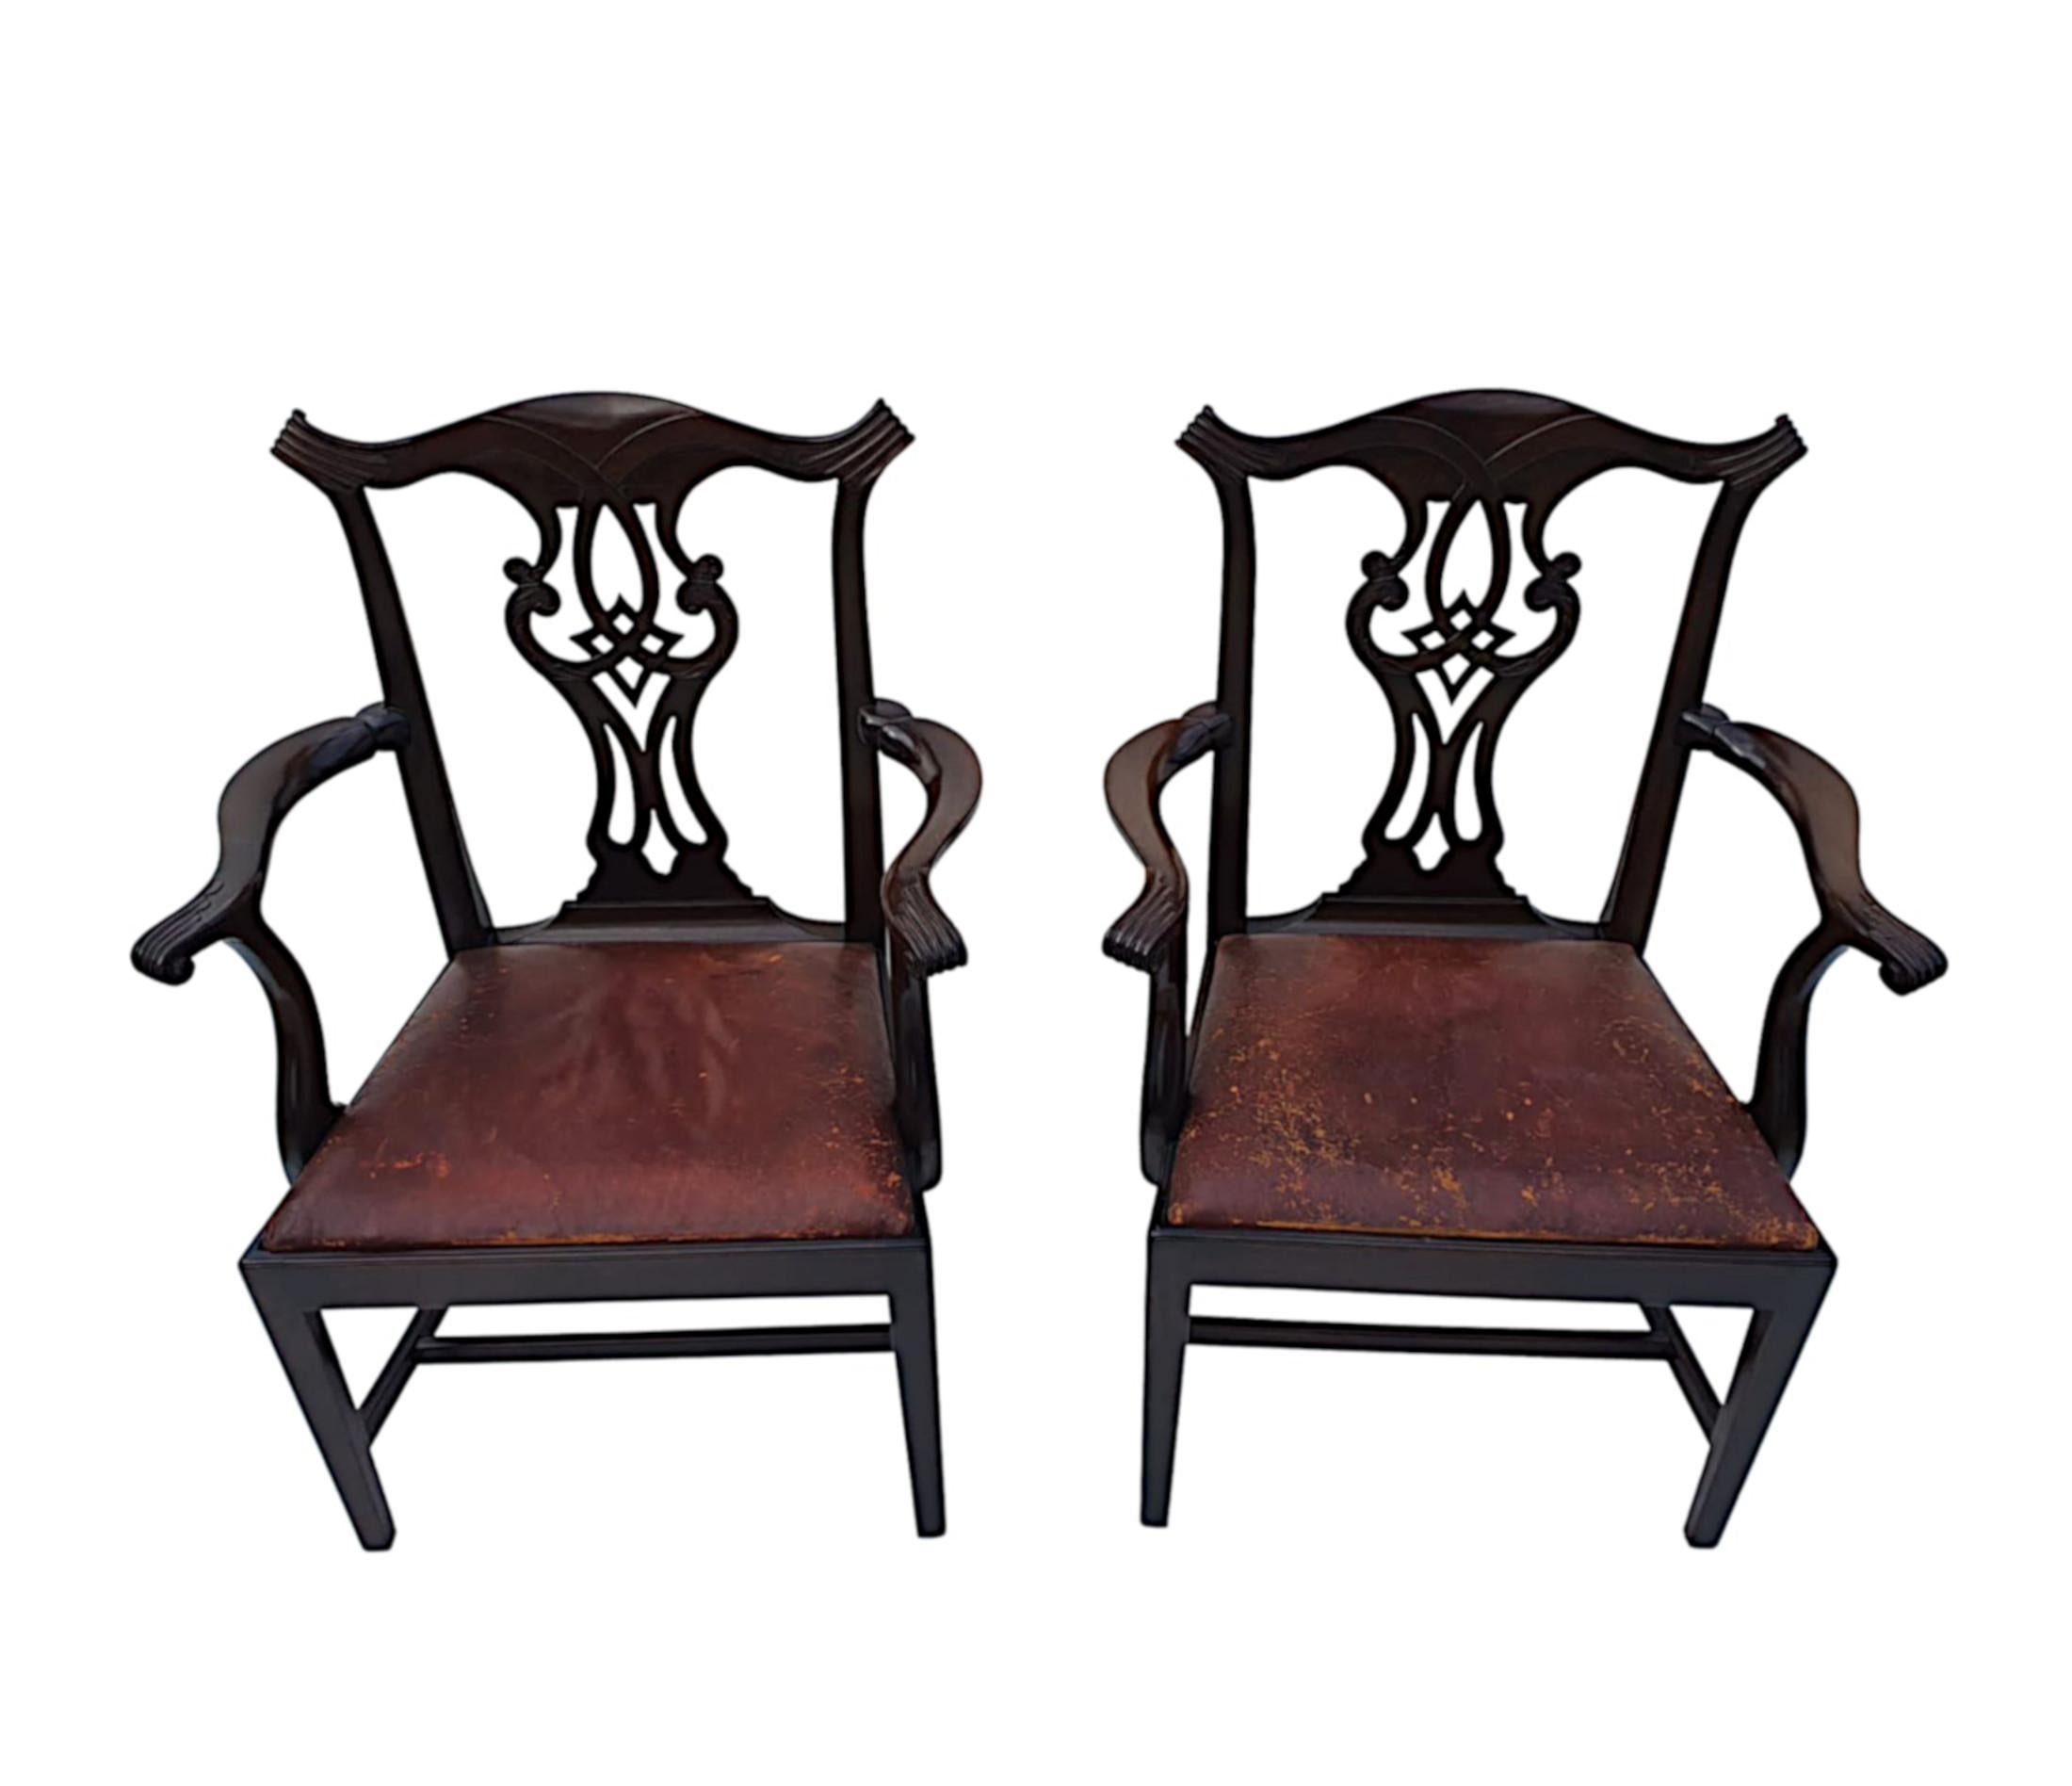 Stunning Pair of 19th Century Georgian Design Armchairs After Thomas Chippendale For Sale 3